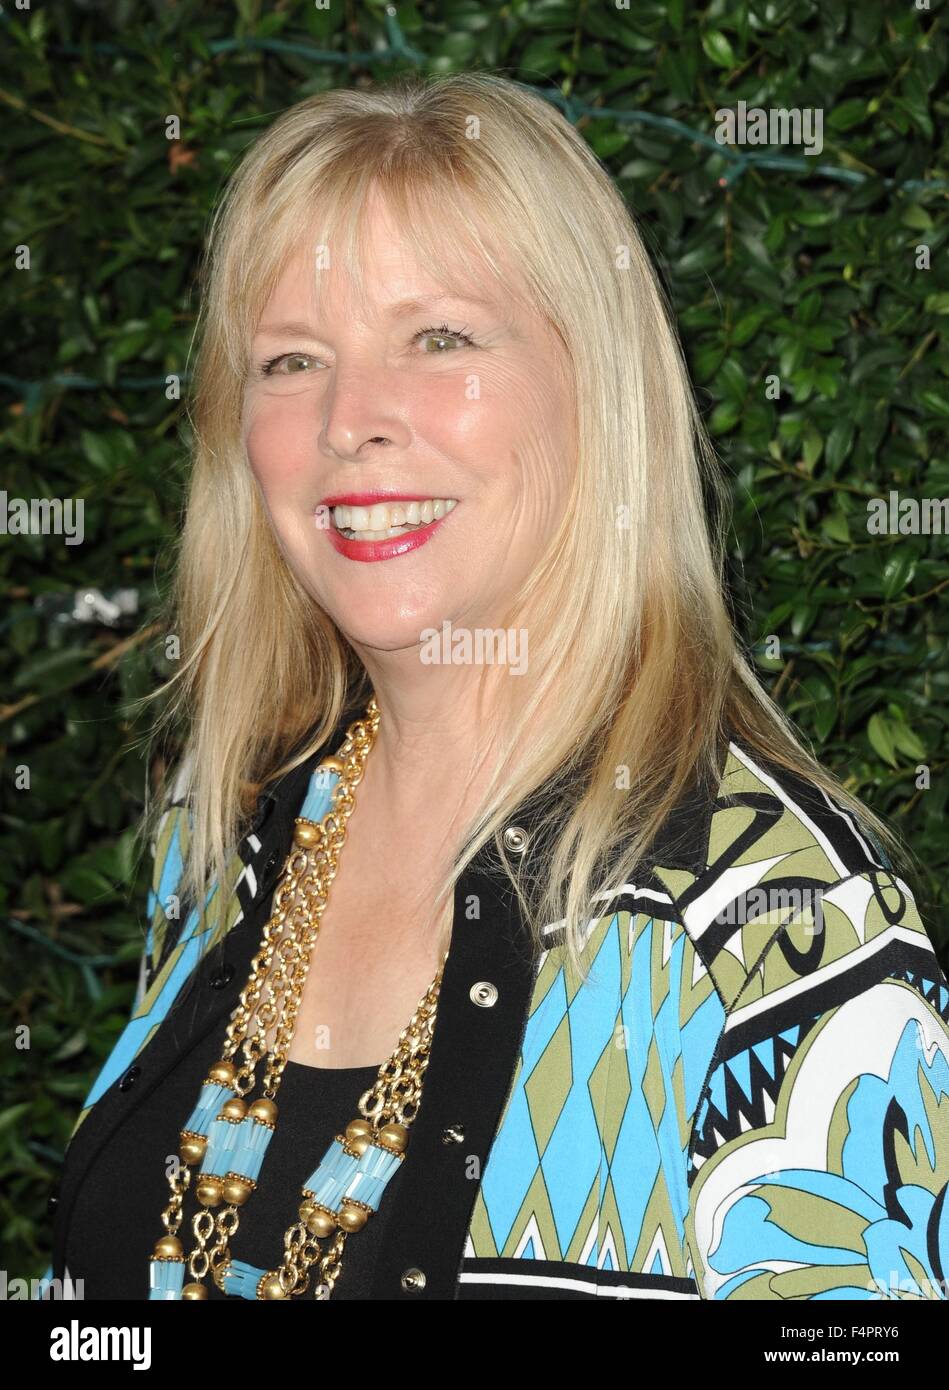 Los Angeles, CA, USA. 20th Oct, 2015. Candy Clark at arrivals for SUFFRAGETTE Premiere, Samuel Goldwyn Theater (AMPAS), Los Angeles, CA October 20, 2015. © Dee Cercone/Everett Collection/Alamy Live News Stock Photo